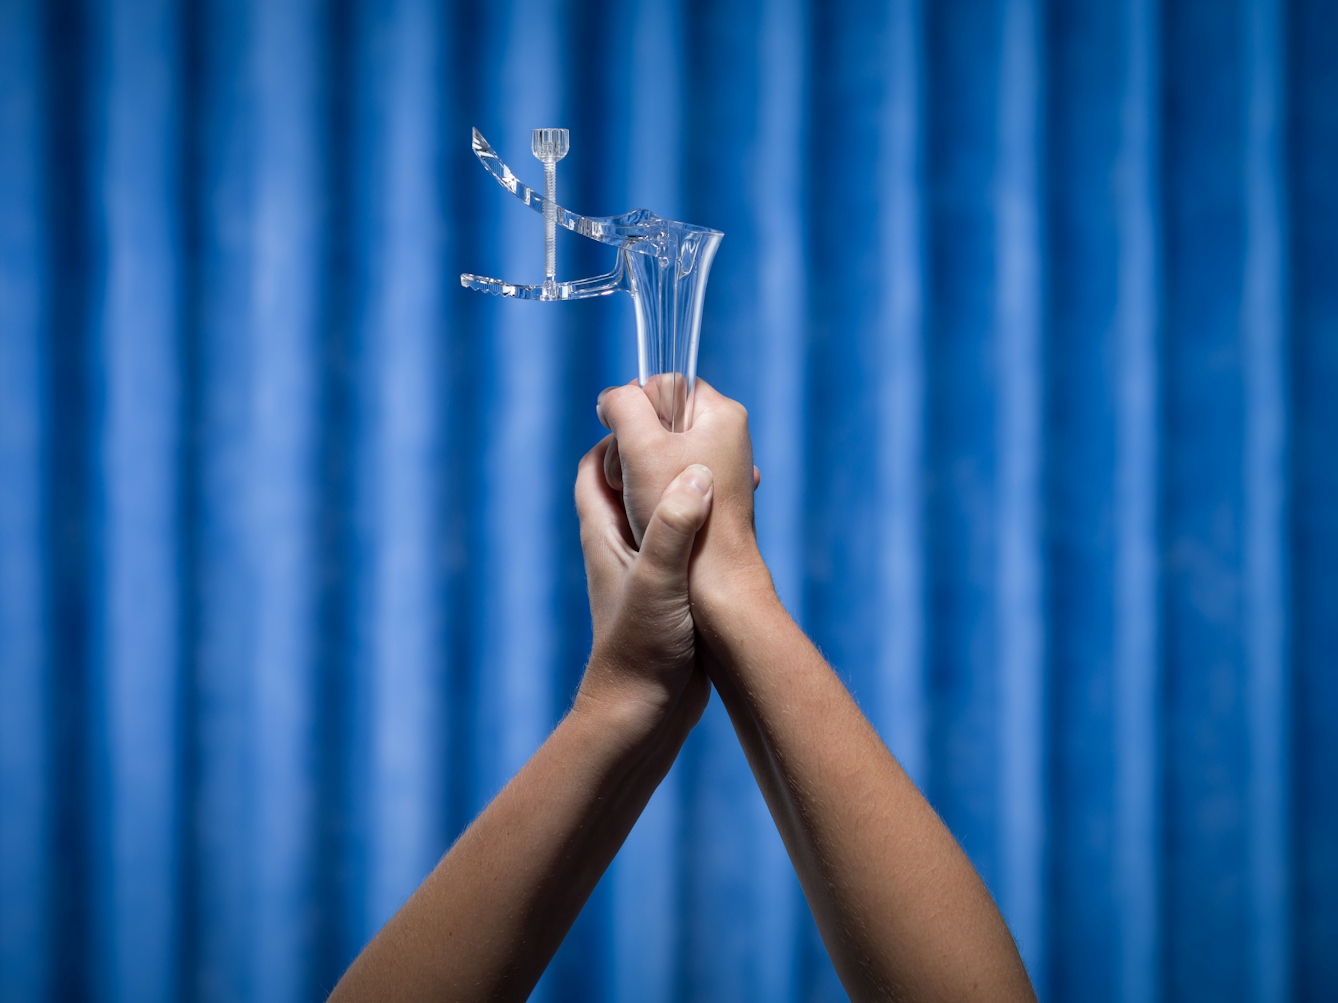 Photograph of a pair of hands firmly holding shut a vaginal speculum. Photographed against a background of blue antibacterial clinical curtains.